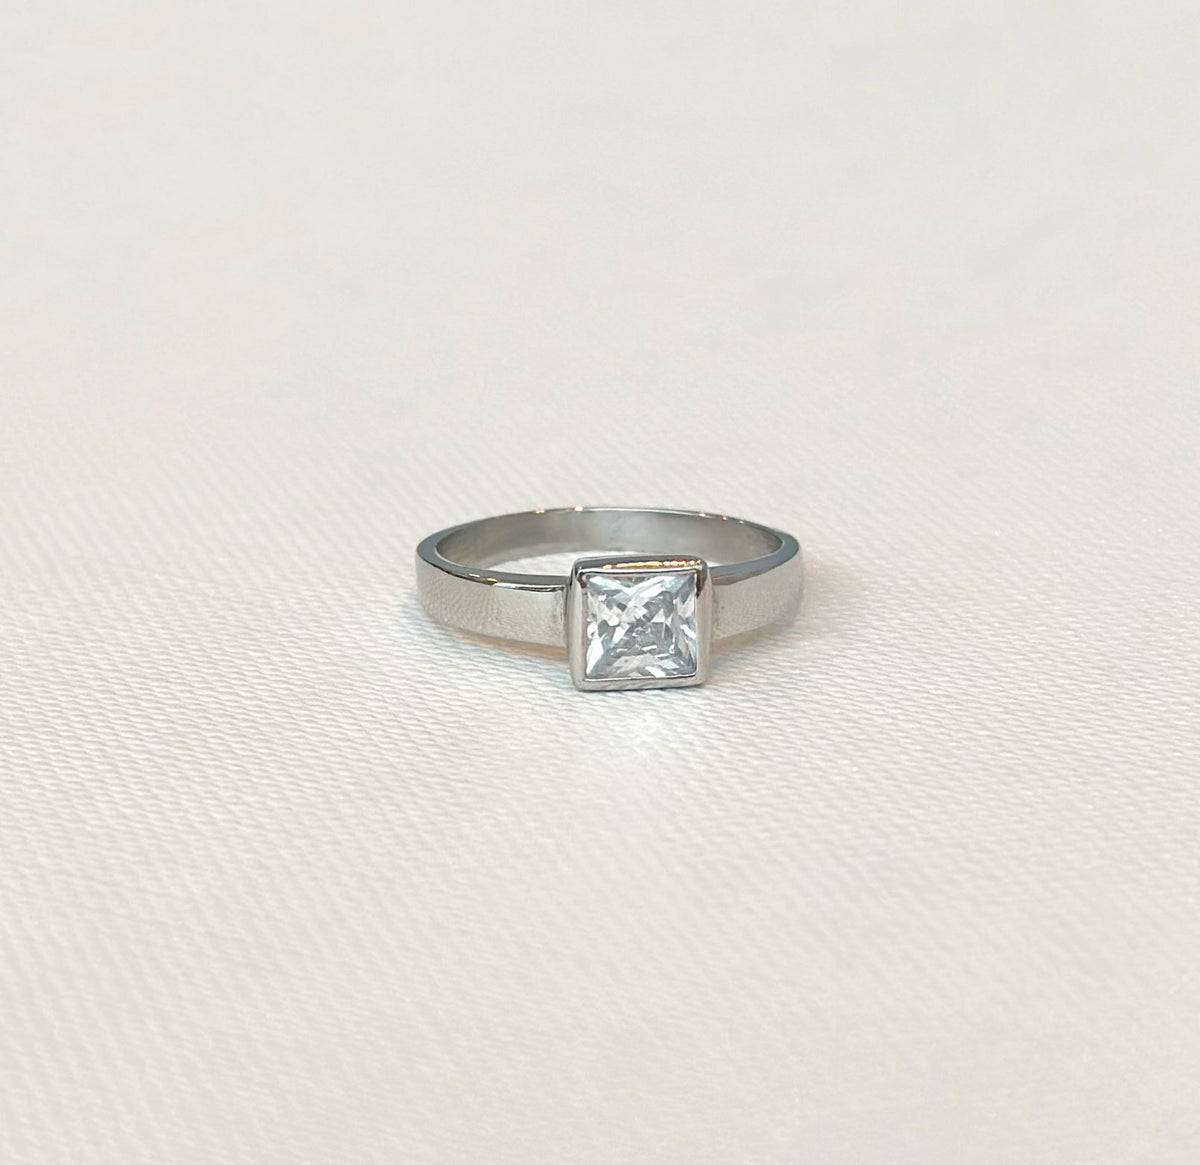 SILVER PRINCESS CUT SOLITAIRE STONE RING - SAMPLE